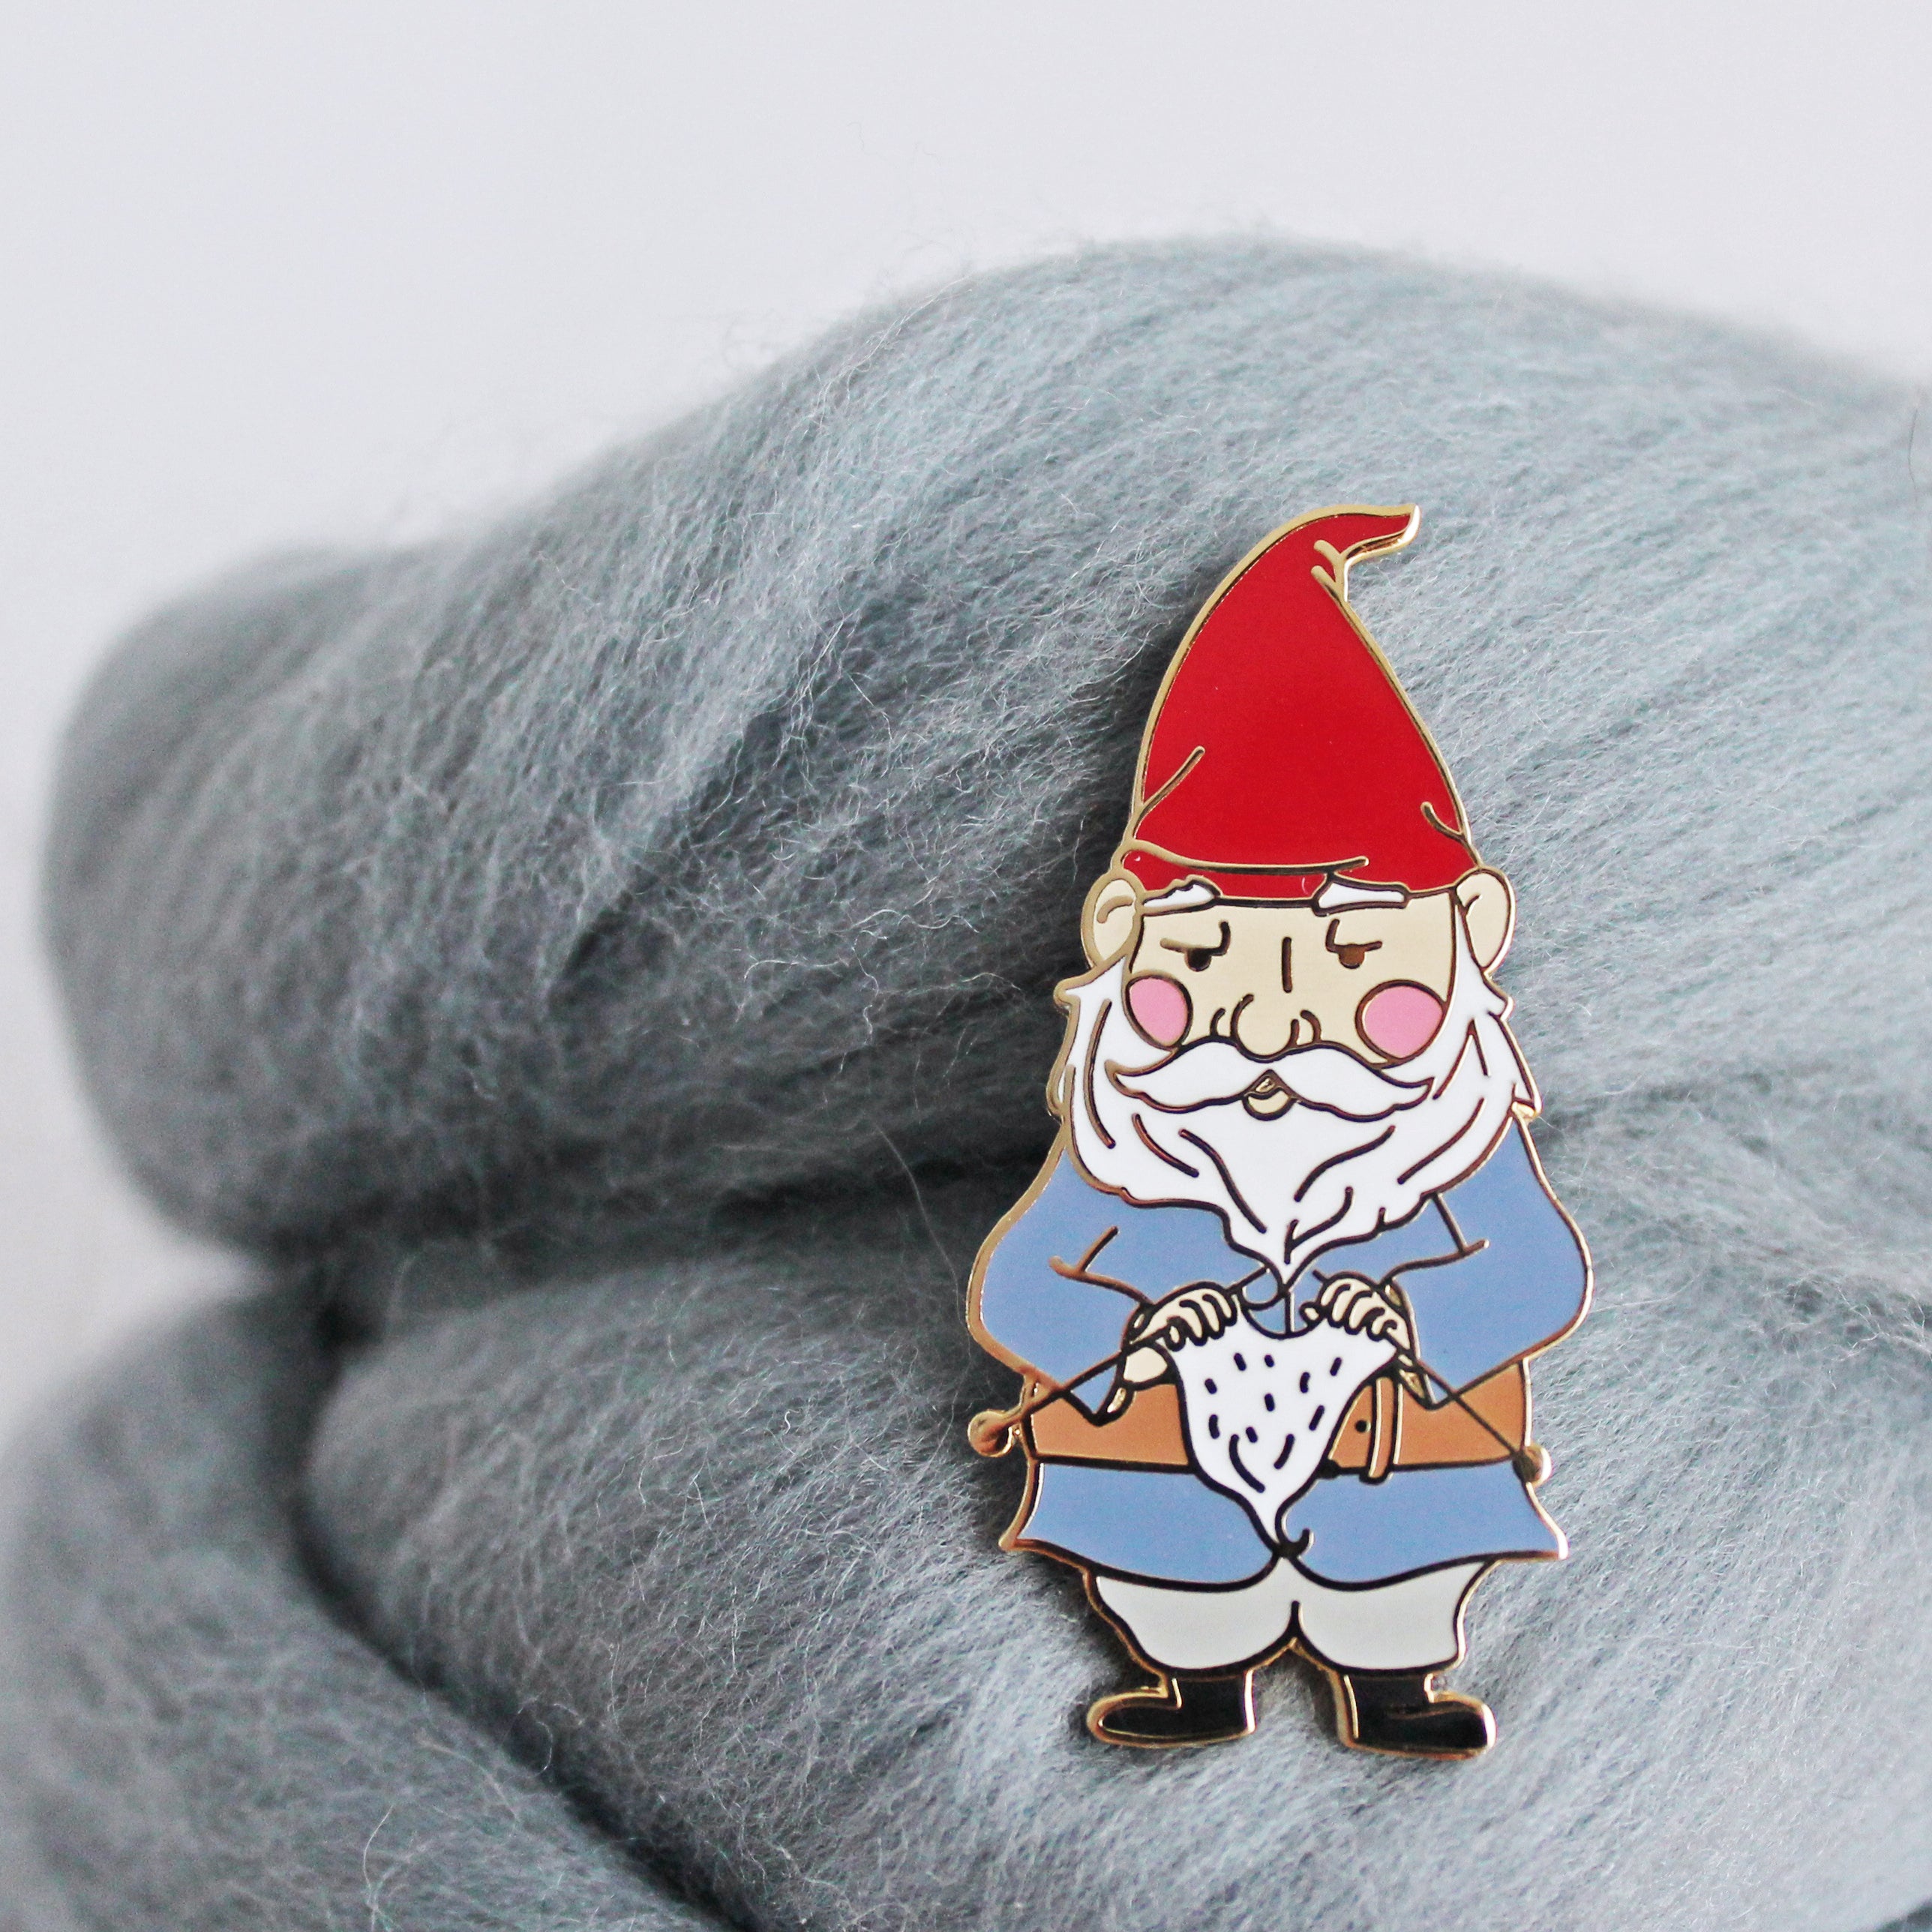 Cute knitting gnome pin for knitters and gnomies. Unique enamel pin design, an adorable knitting accessory perfect for your project bag.